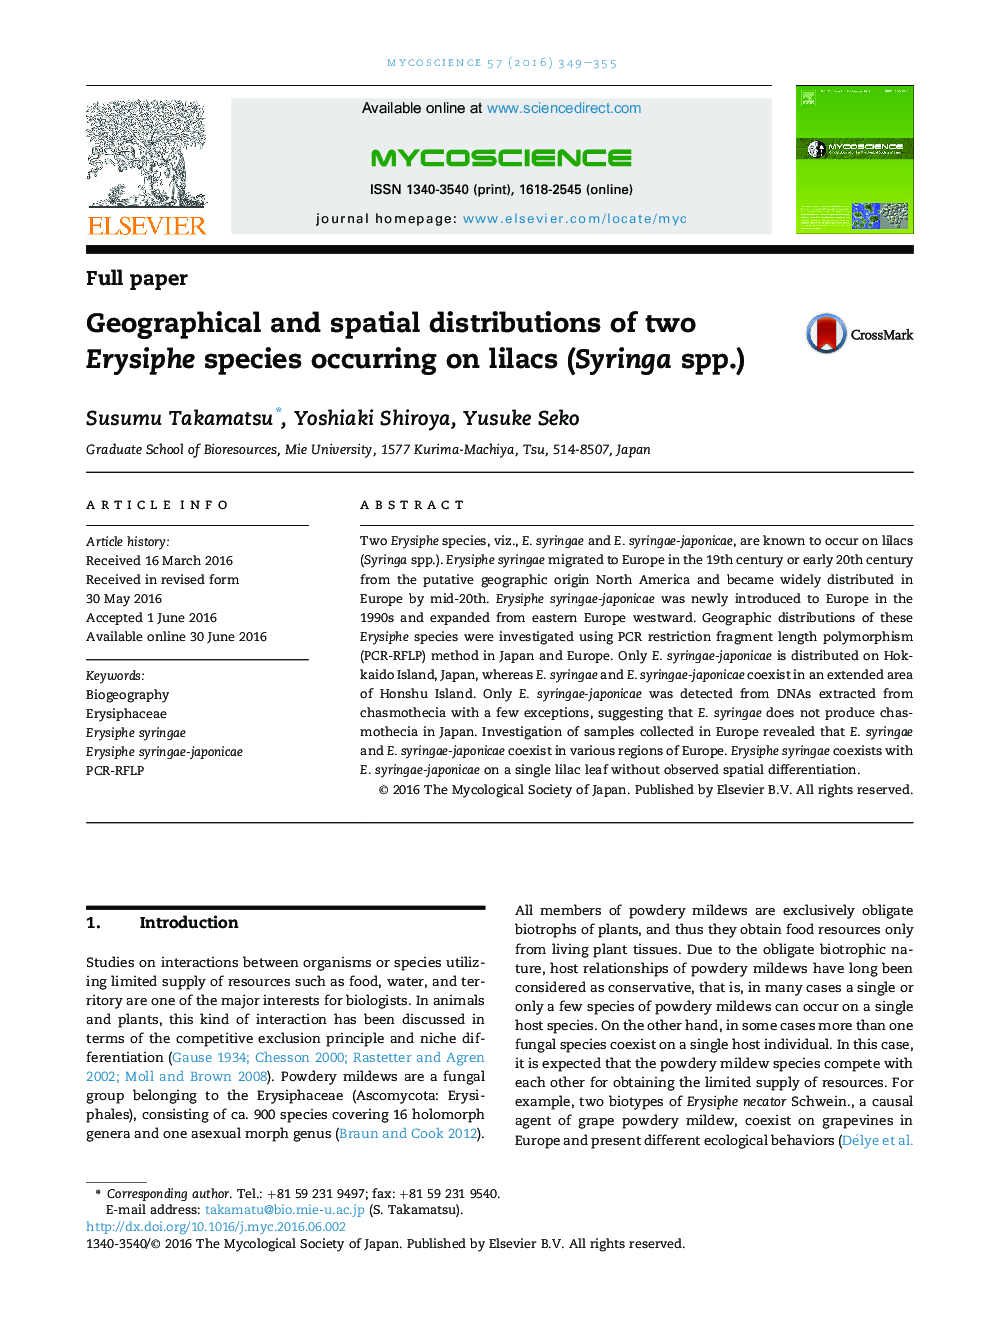 Geographical and spatial distributions of two Erysiphe species occurring on lilacs (Syringa spp.)